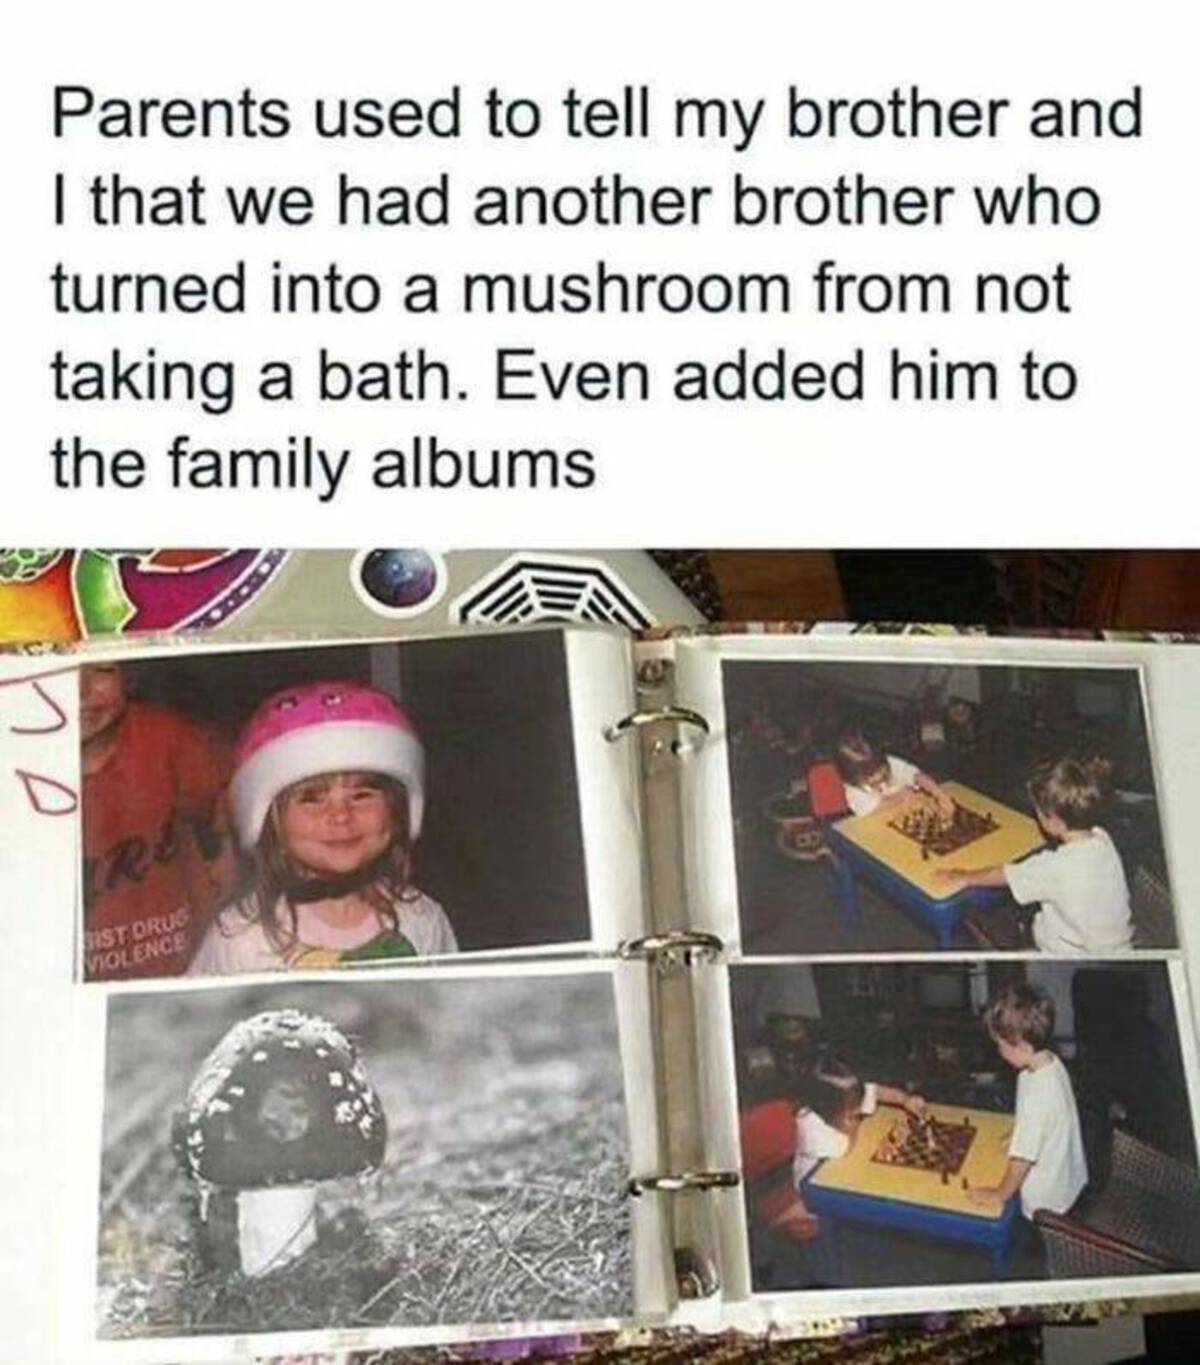 my parents told me i had one more brother who turned into a mushroom cause he did not want to take a shower they even put him into the family album - Parents used to tell my brother and I that we had another brother who turned into a mushroom from not tak